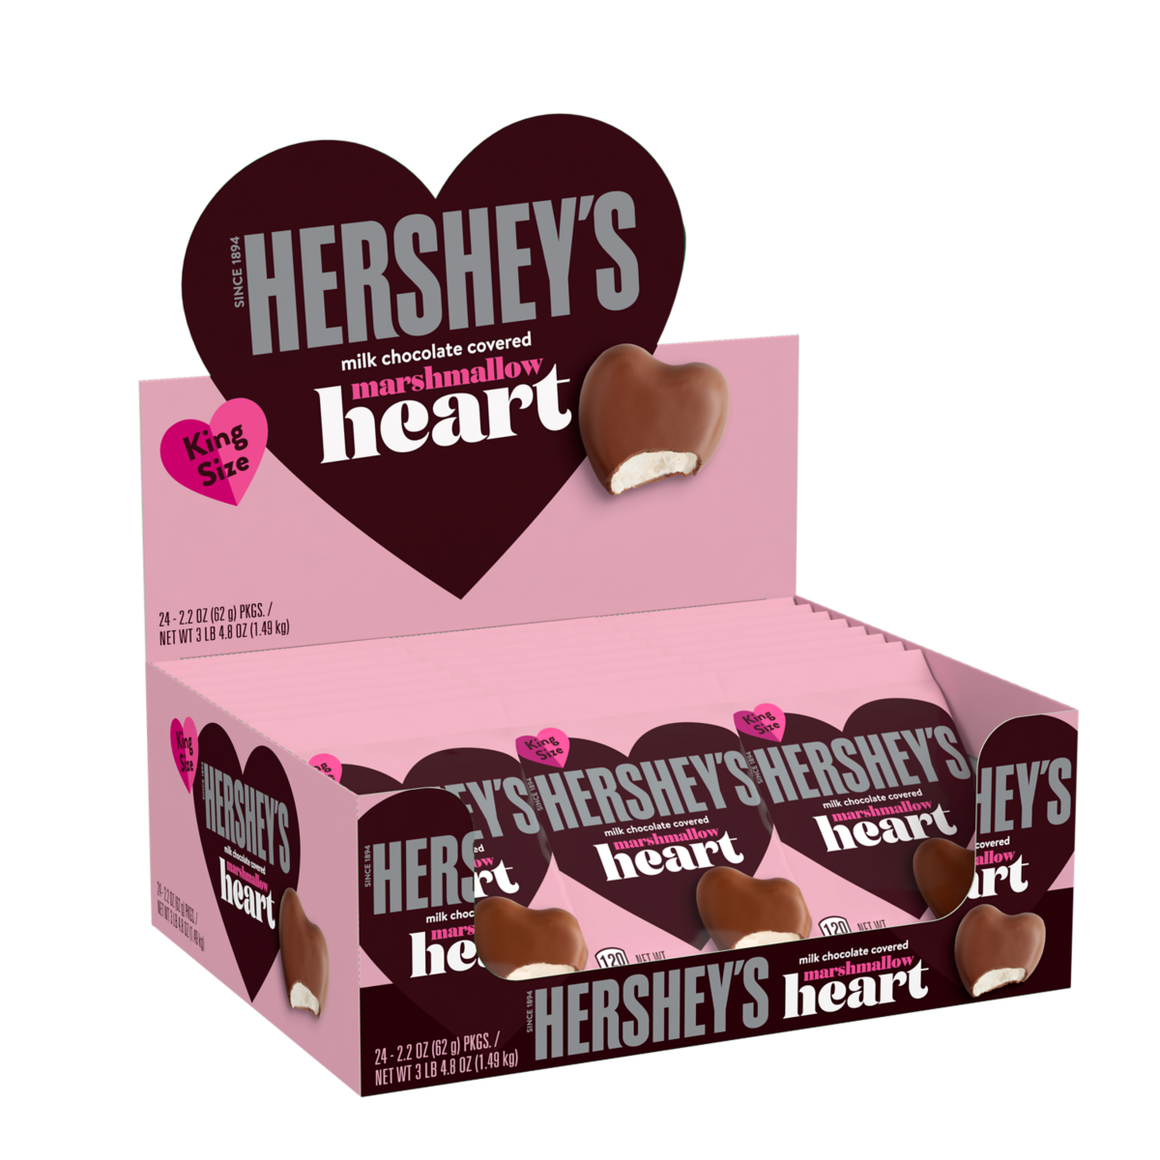 Hershey's Milk Chocolate Marshmallow Heart - 2.2 oz www.allcitycandy.com for fresh and delicious sweet candy treats.